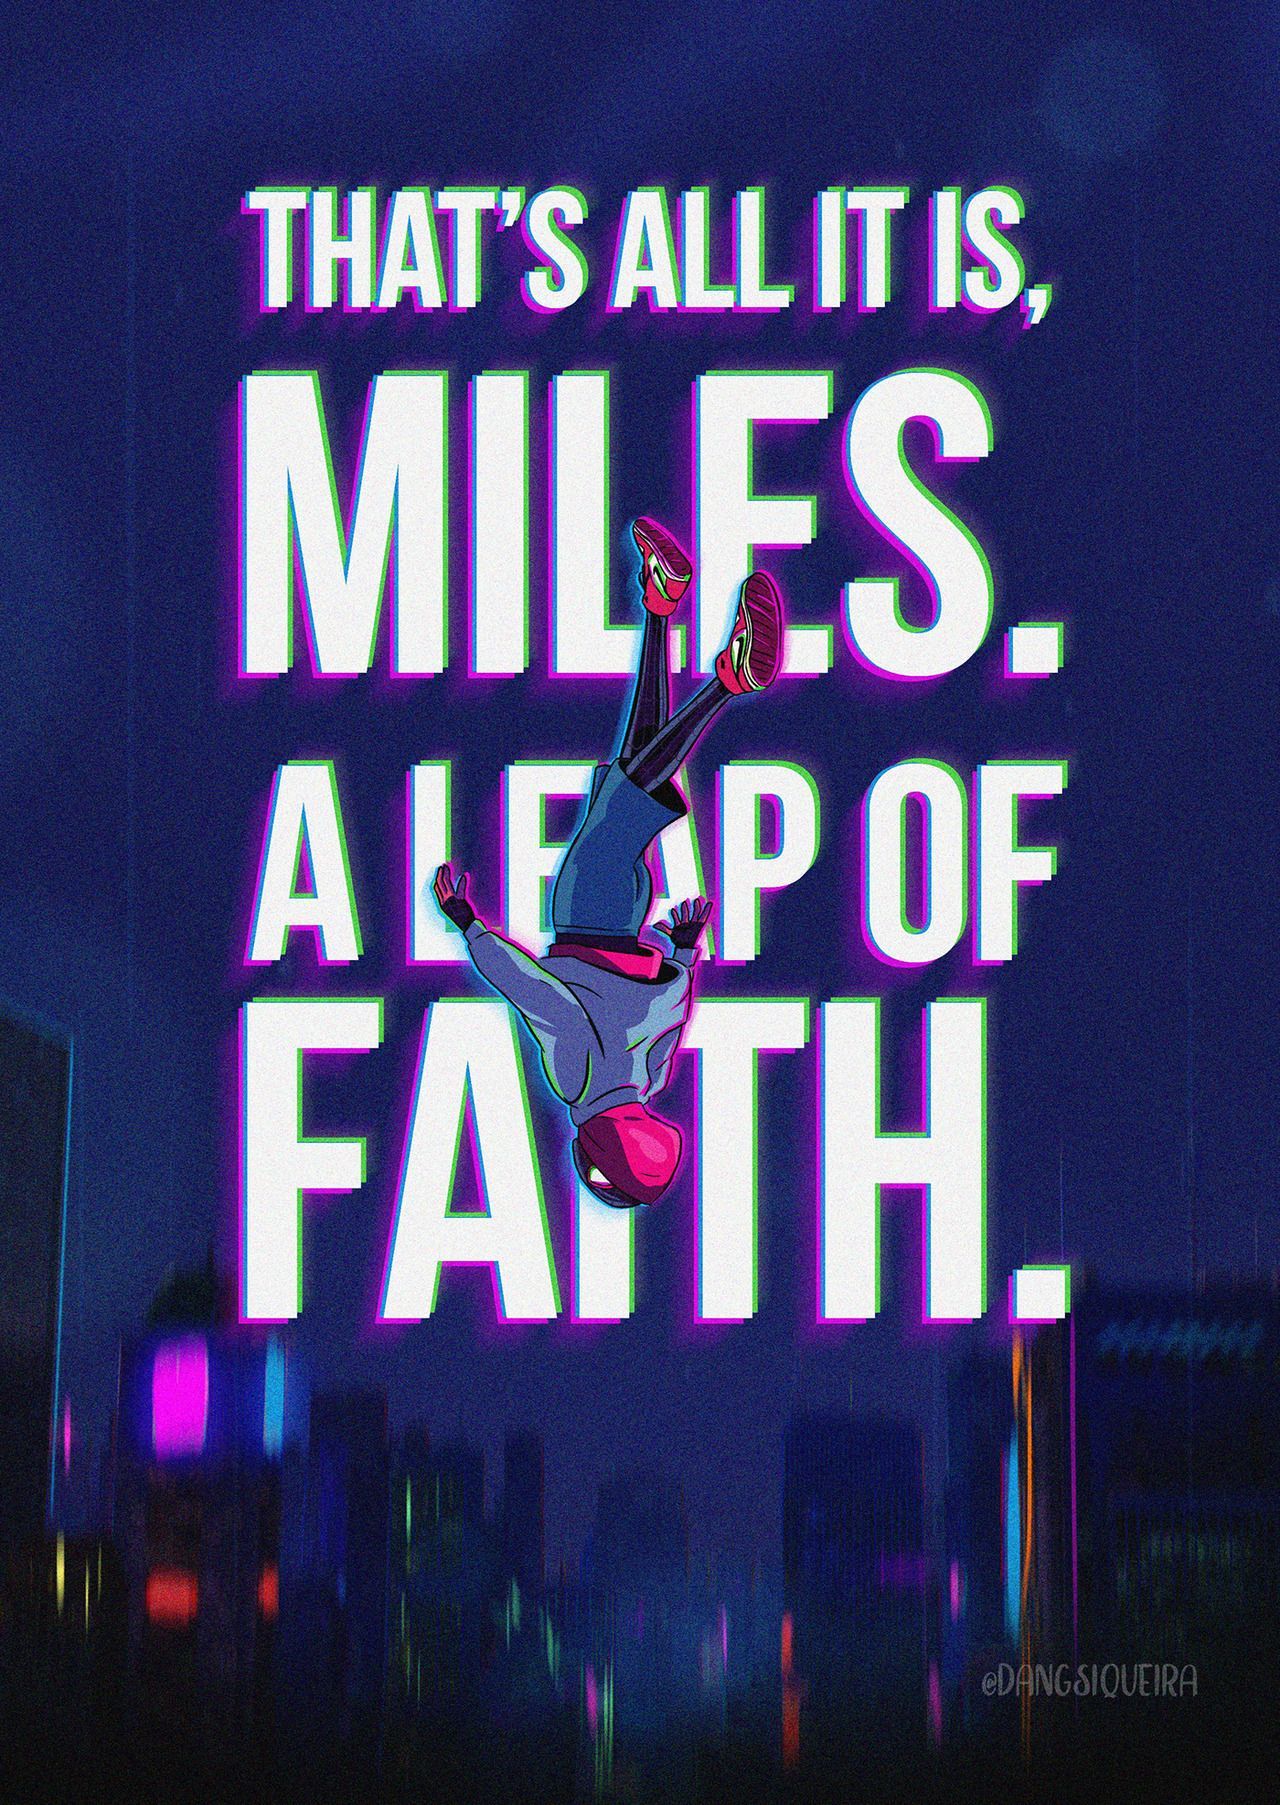 Chelsea Woods onS. Spider man quotes, Spider verse